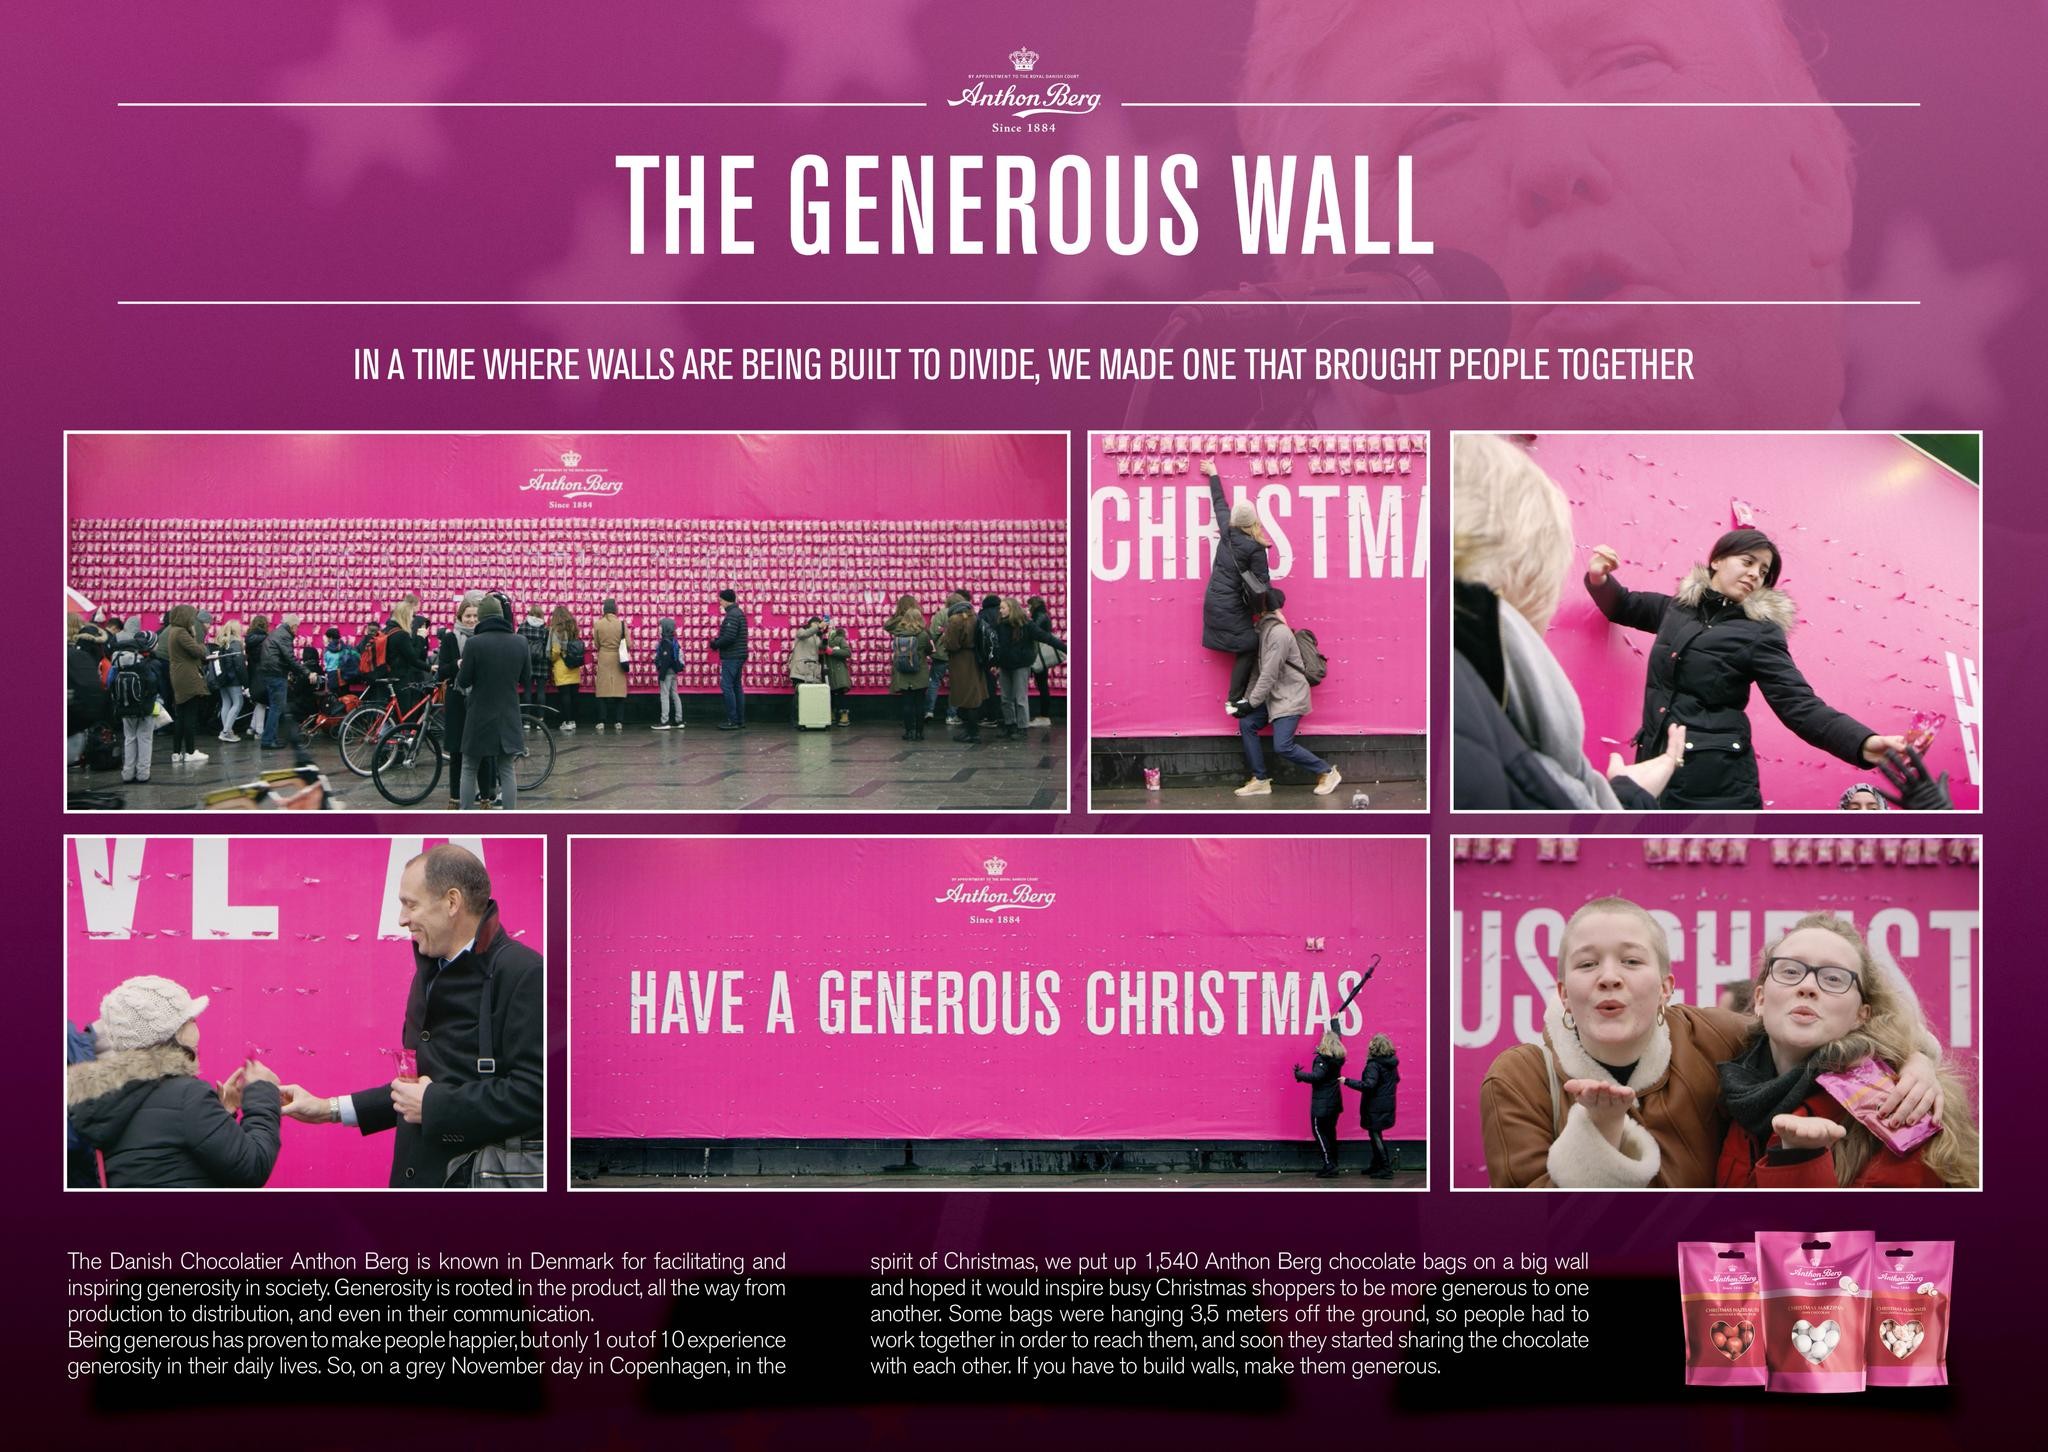 The Generous Wall